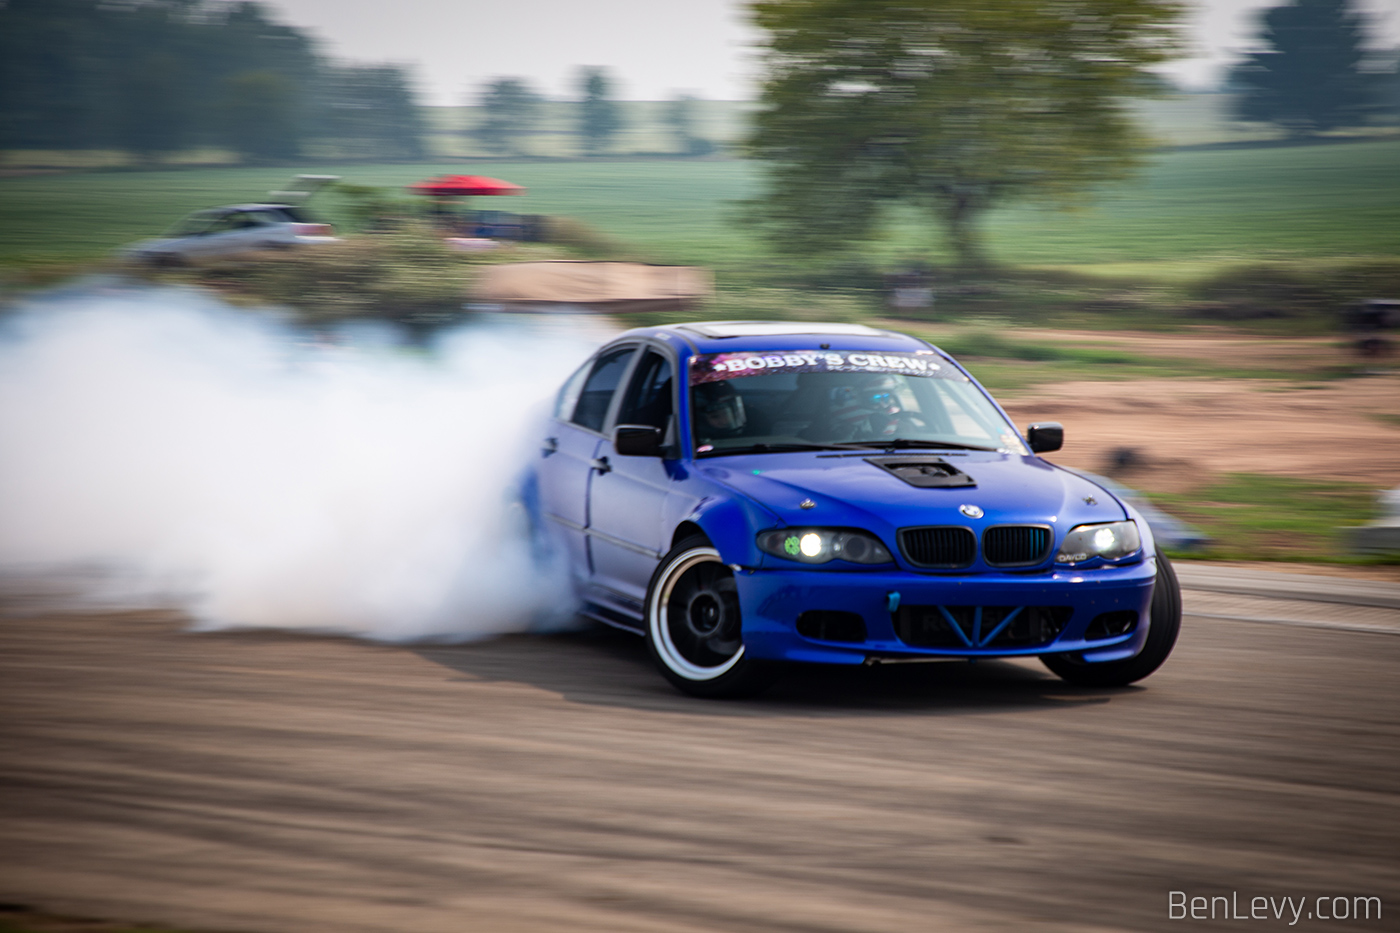 Coyote Powered E46 BMW Drifting in Wisconsin